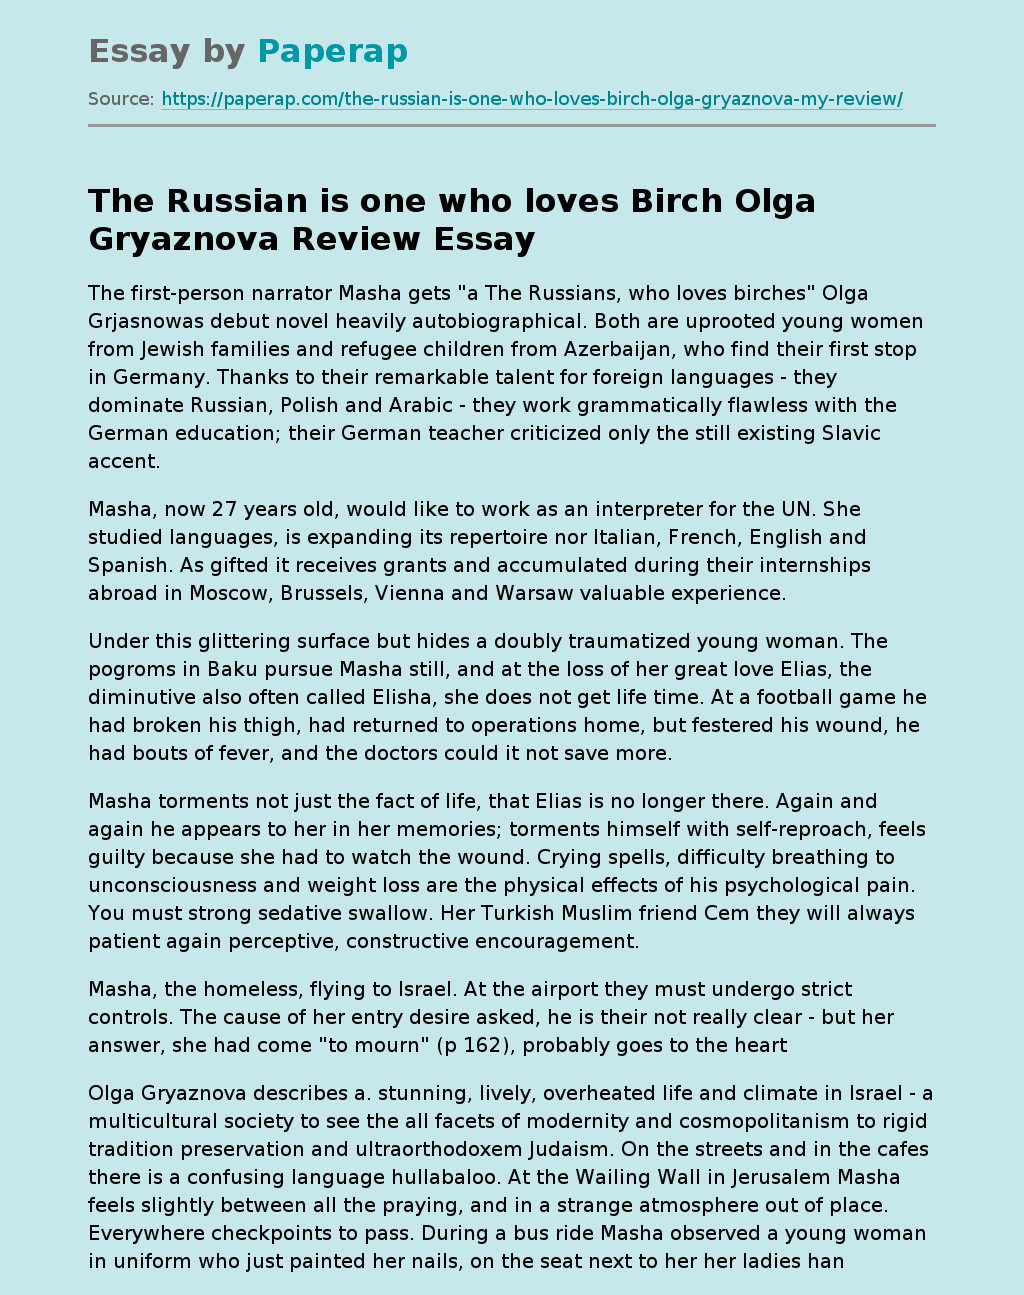 The Russian Is One Who Loves Birch Olga Gryaznova Review